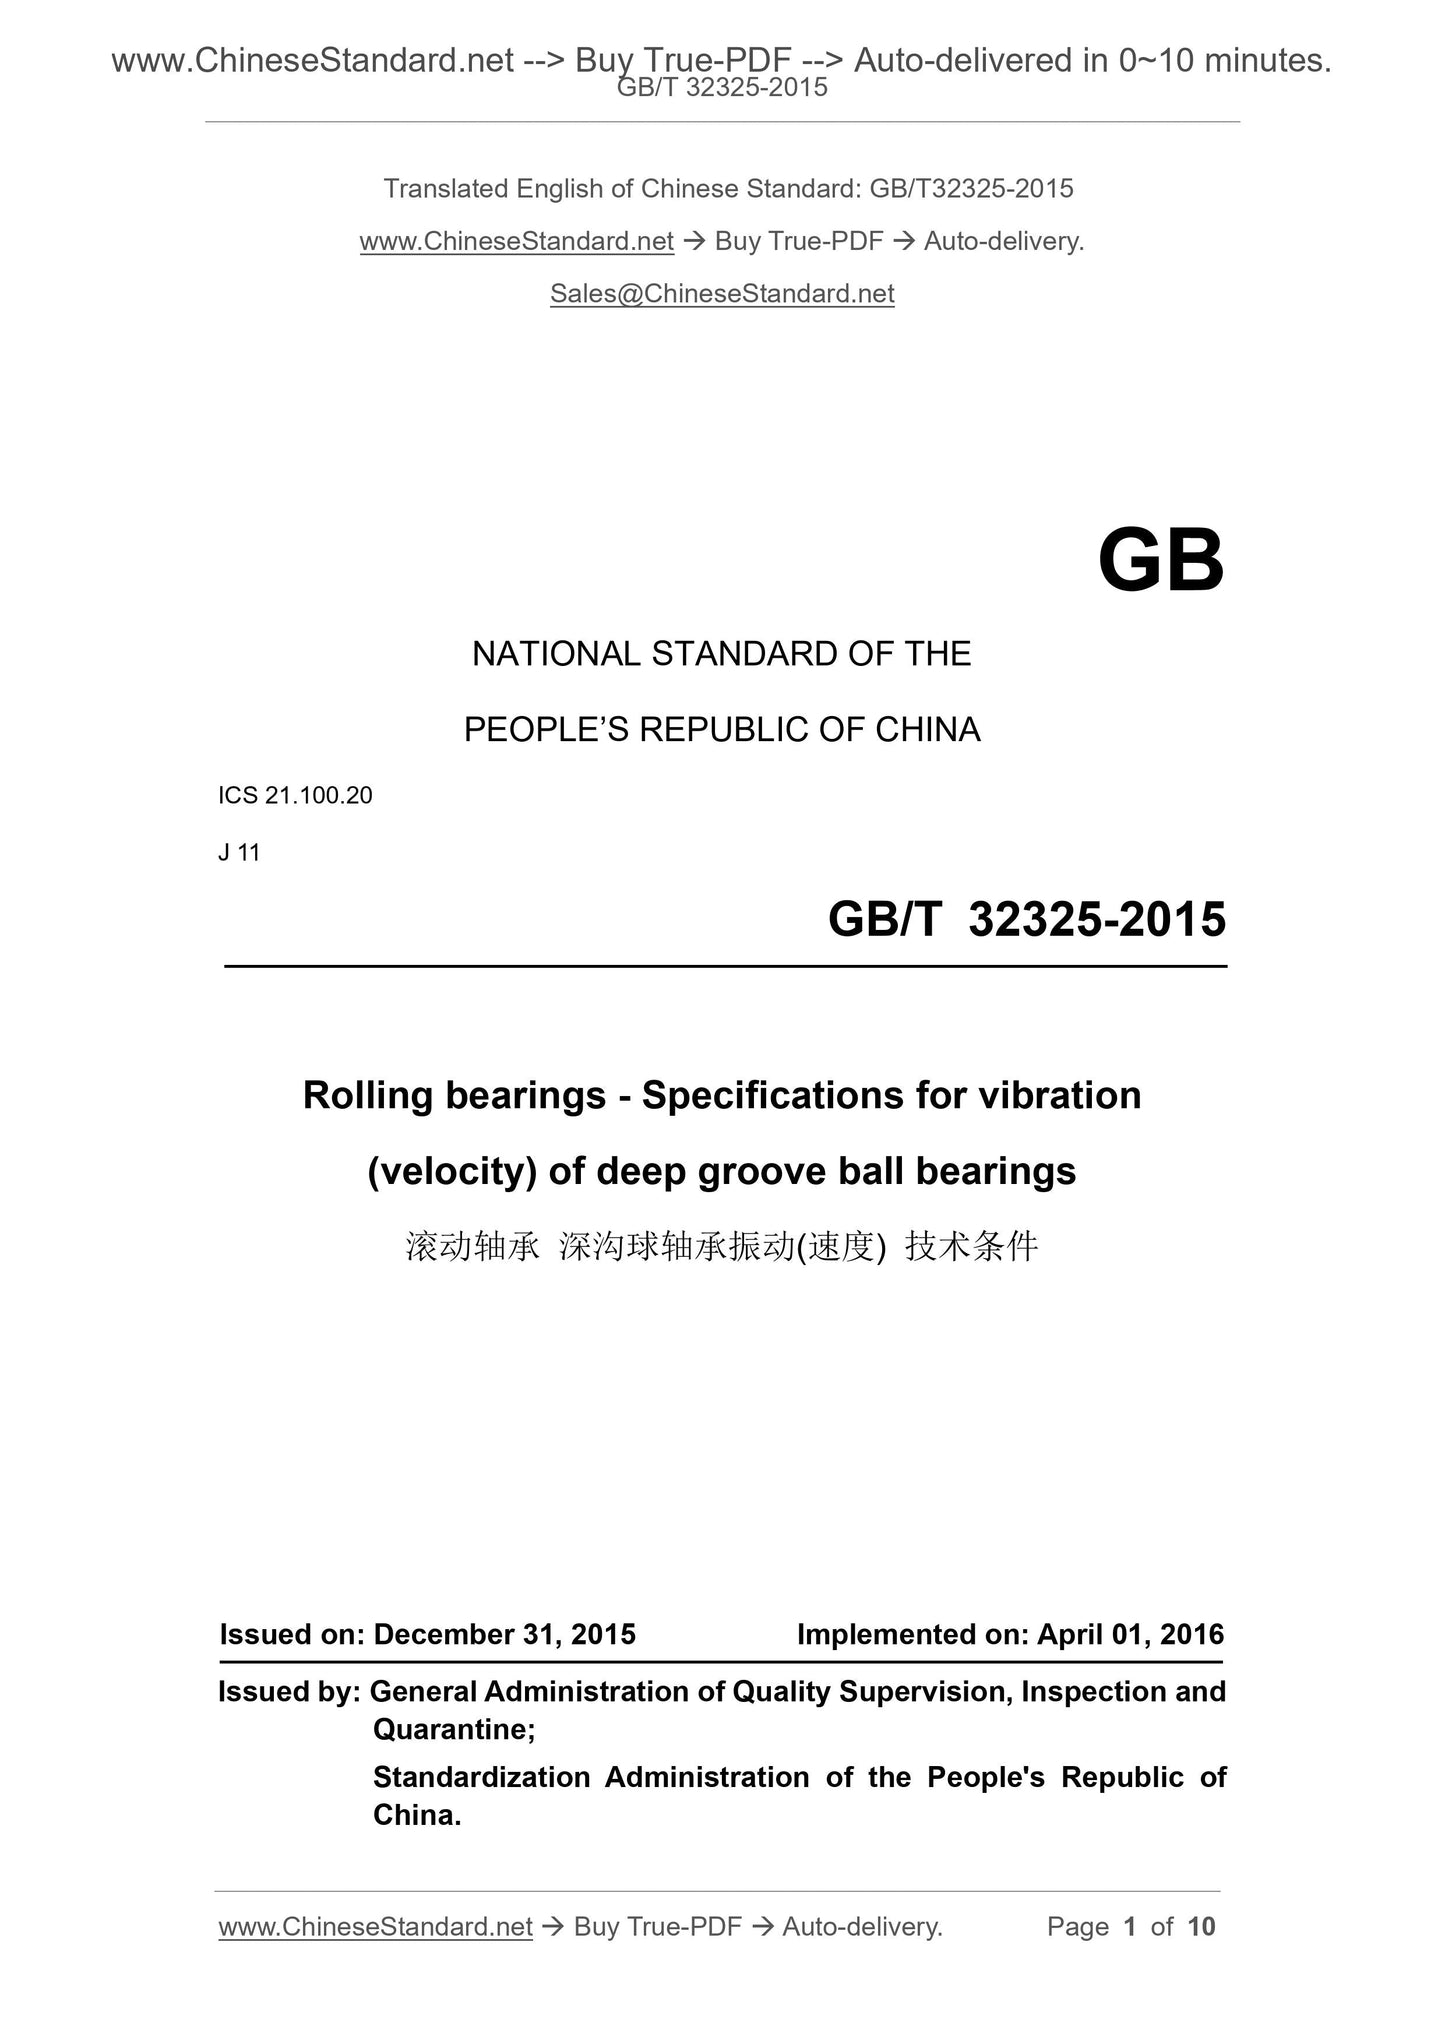 GB/T 32325-2015 Page 1